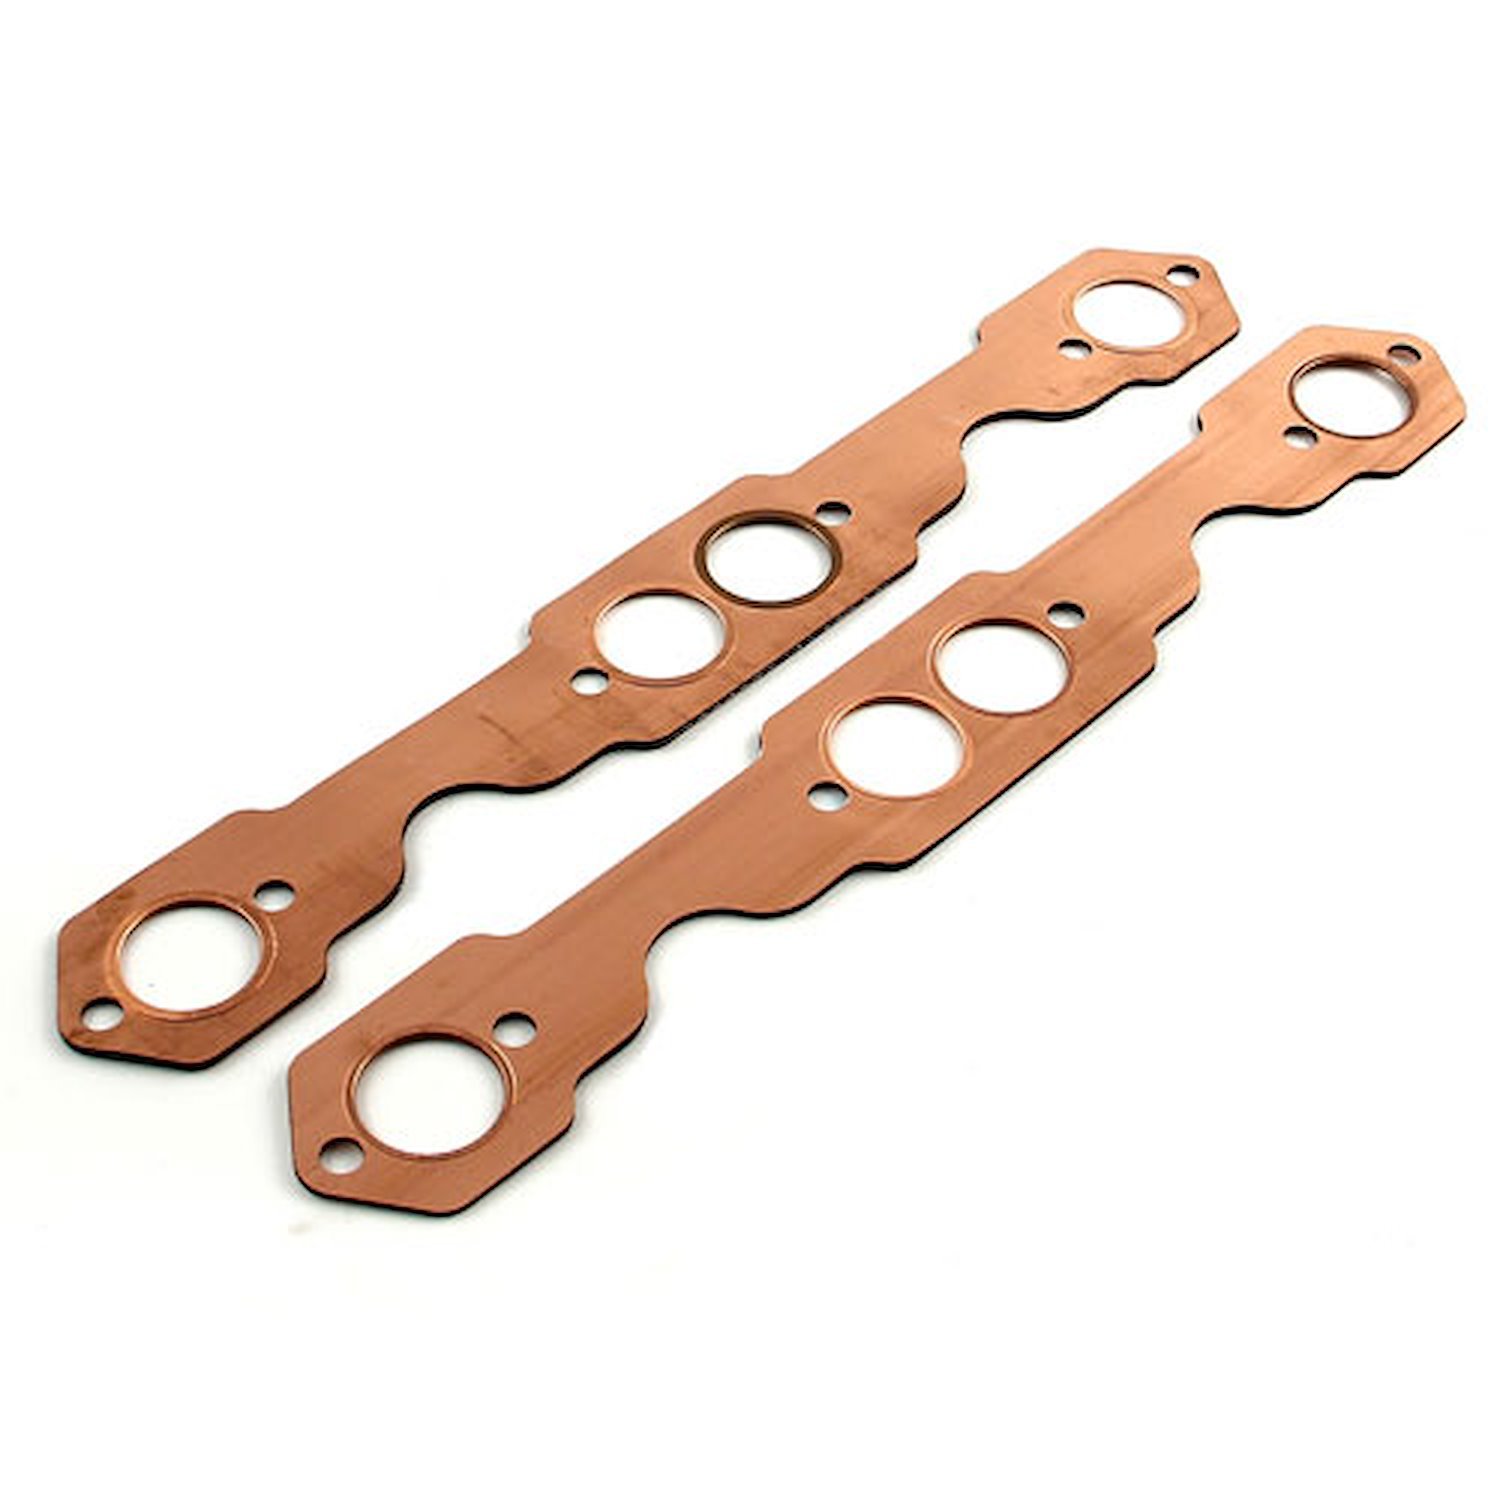 SCE Gaskets 4011 Pro Copper Header Gaskets For Small Block Chevy NEW